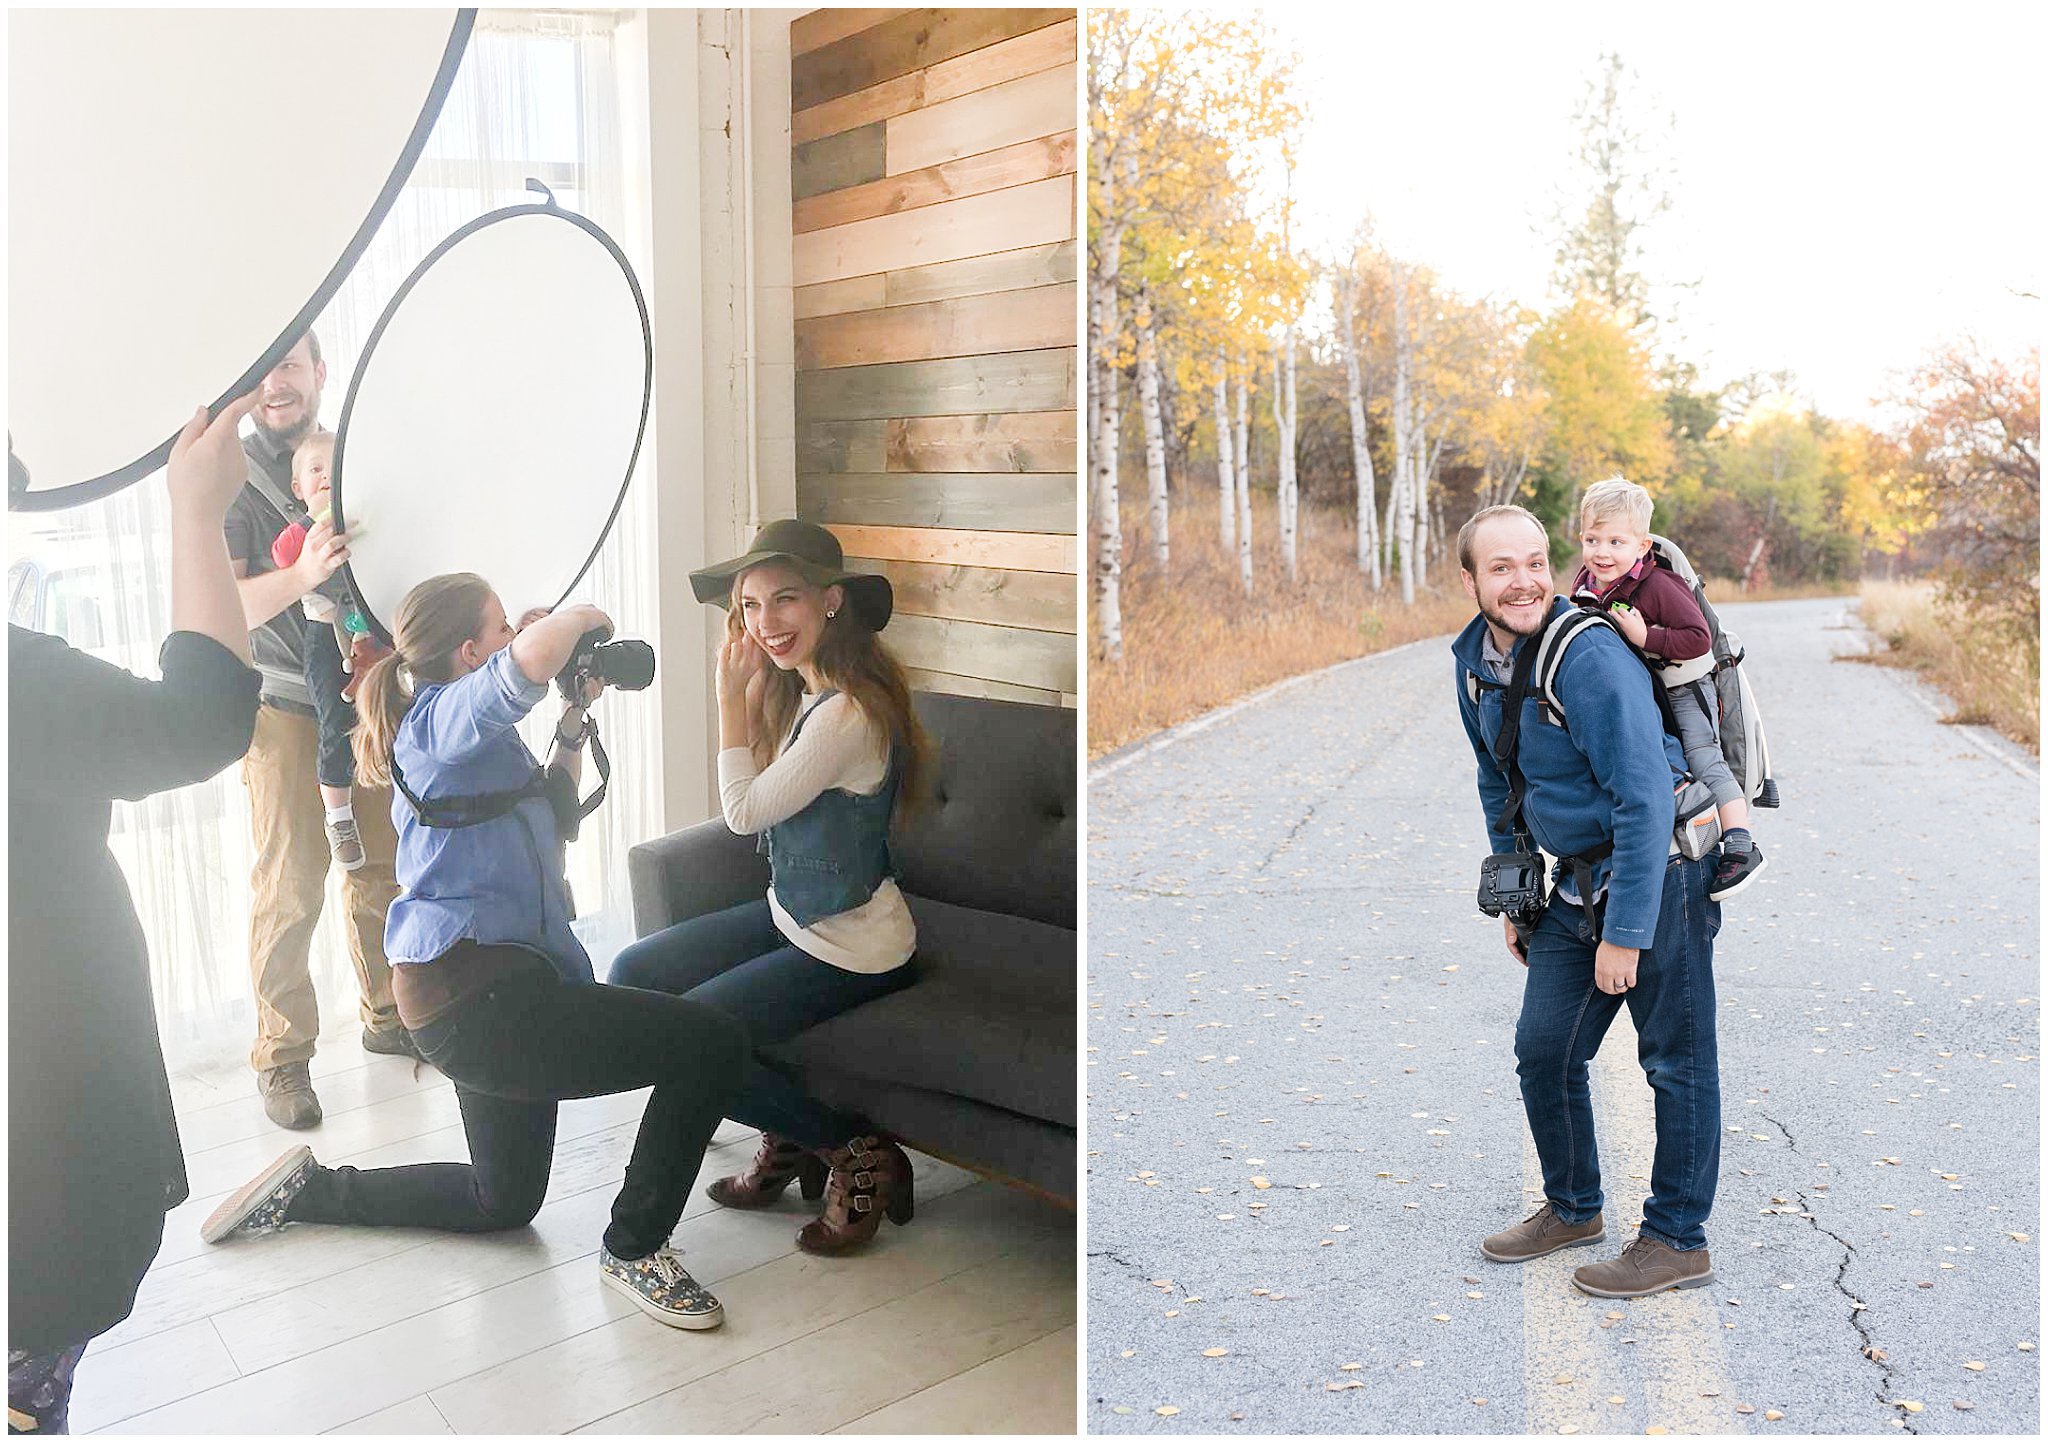 Utah Photographers at Snowbasin and with Adventure Darling | Husband and Wife Photography Team | Jessie and Dallin Photography